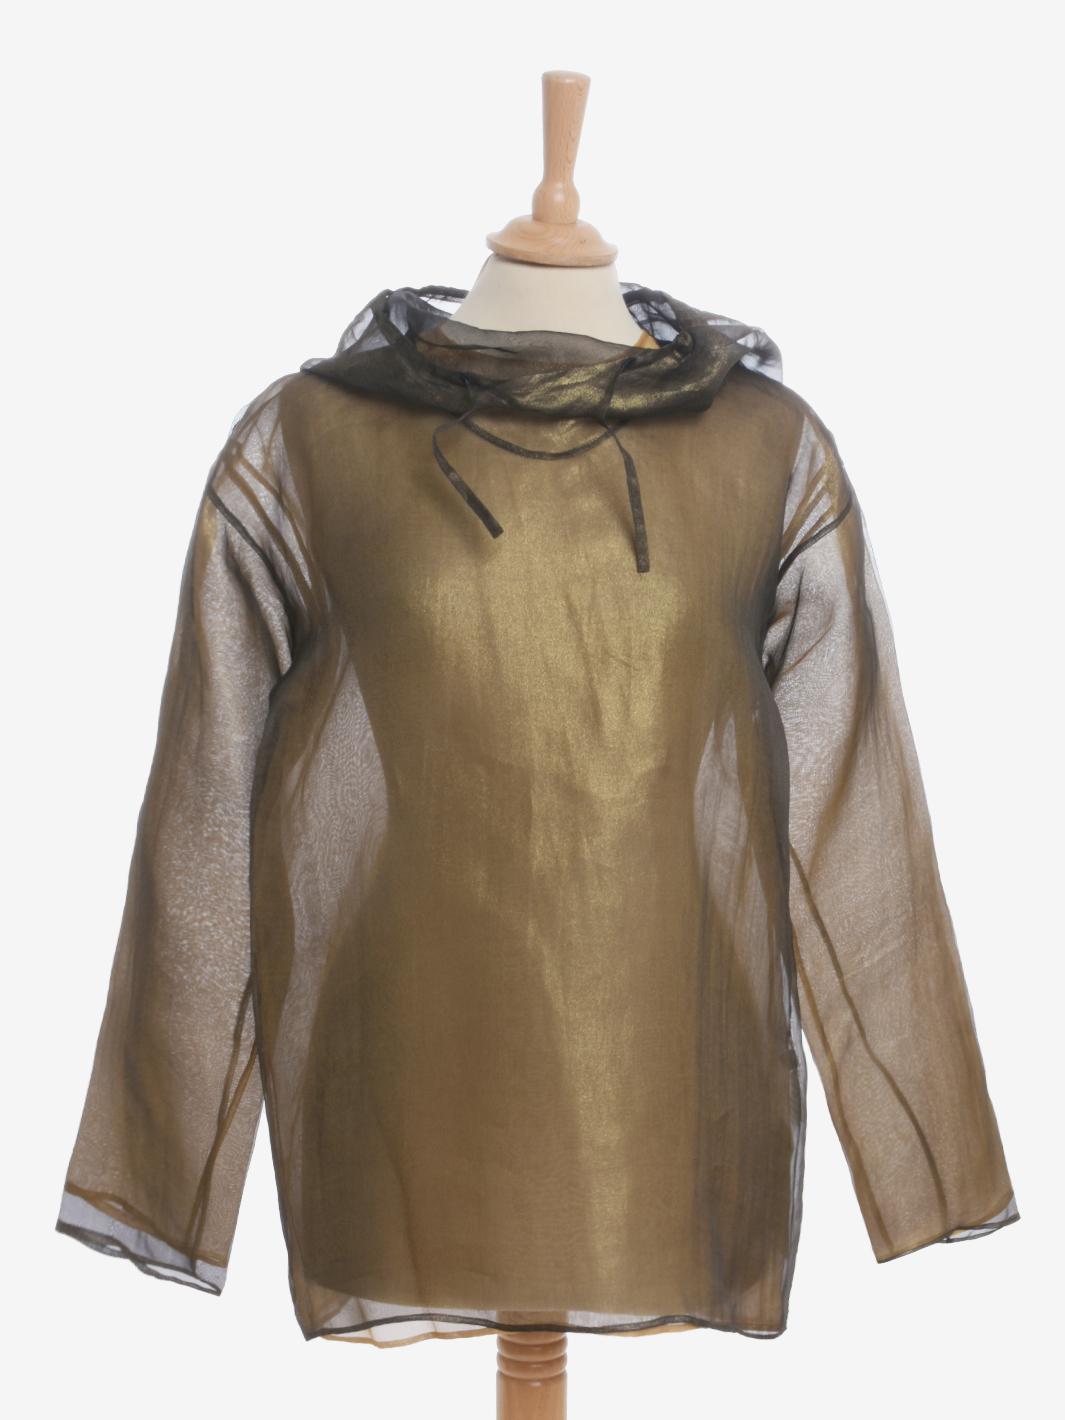 Issey Miyake Organza Blouse is a rare over-fit Miyake garment composed of an overlay of two organza garments: one gold and the upper one black with gold inserts and featuring a high collar with an adjustable pointed hood with